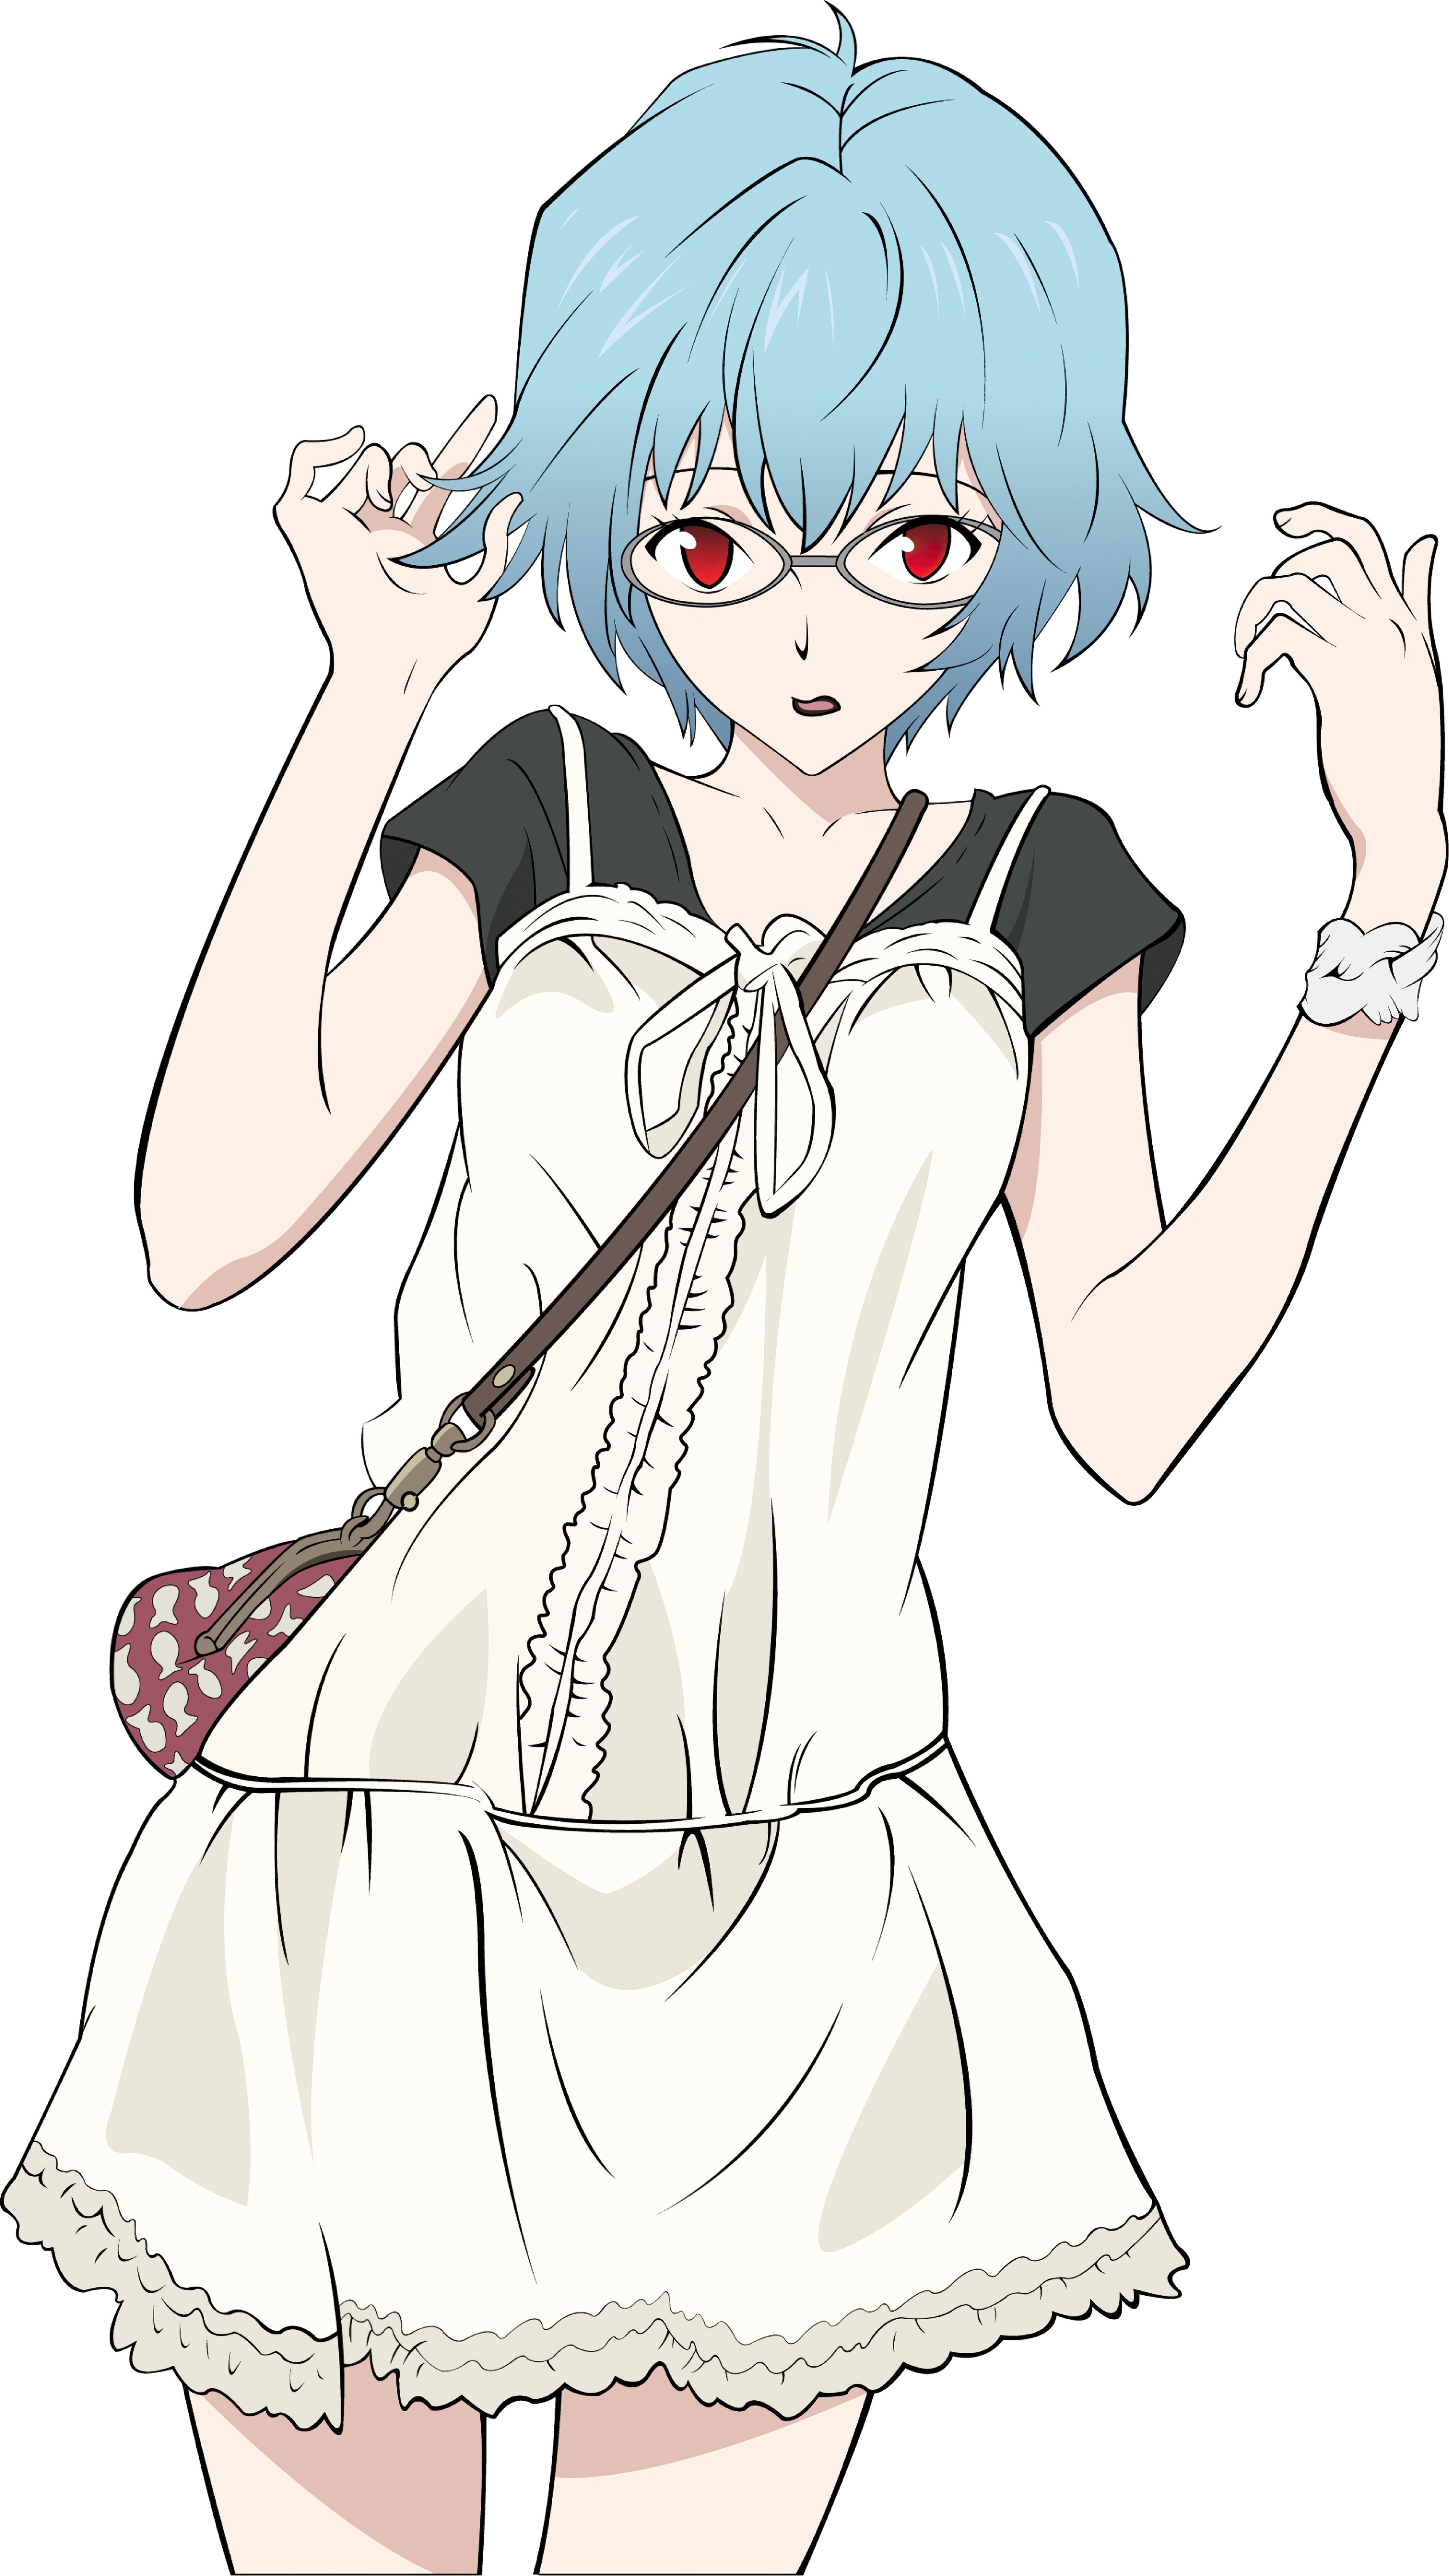 159-1597888_rei-ayanami-vector-rei-ayanami-with-glasses.jpg